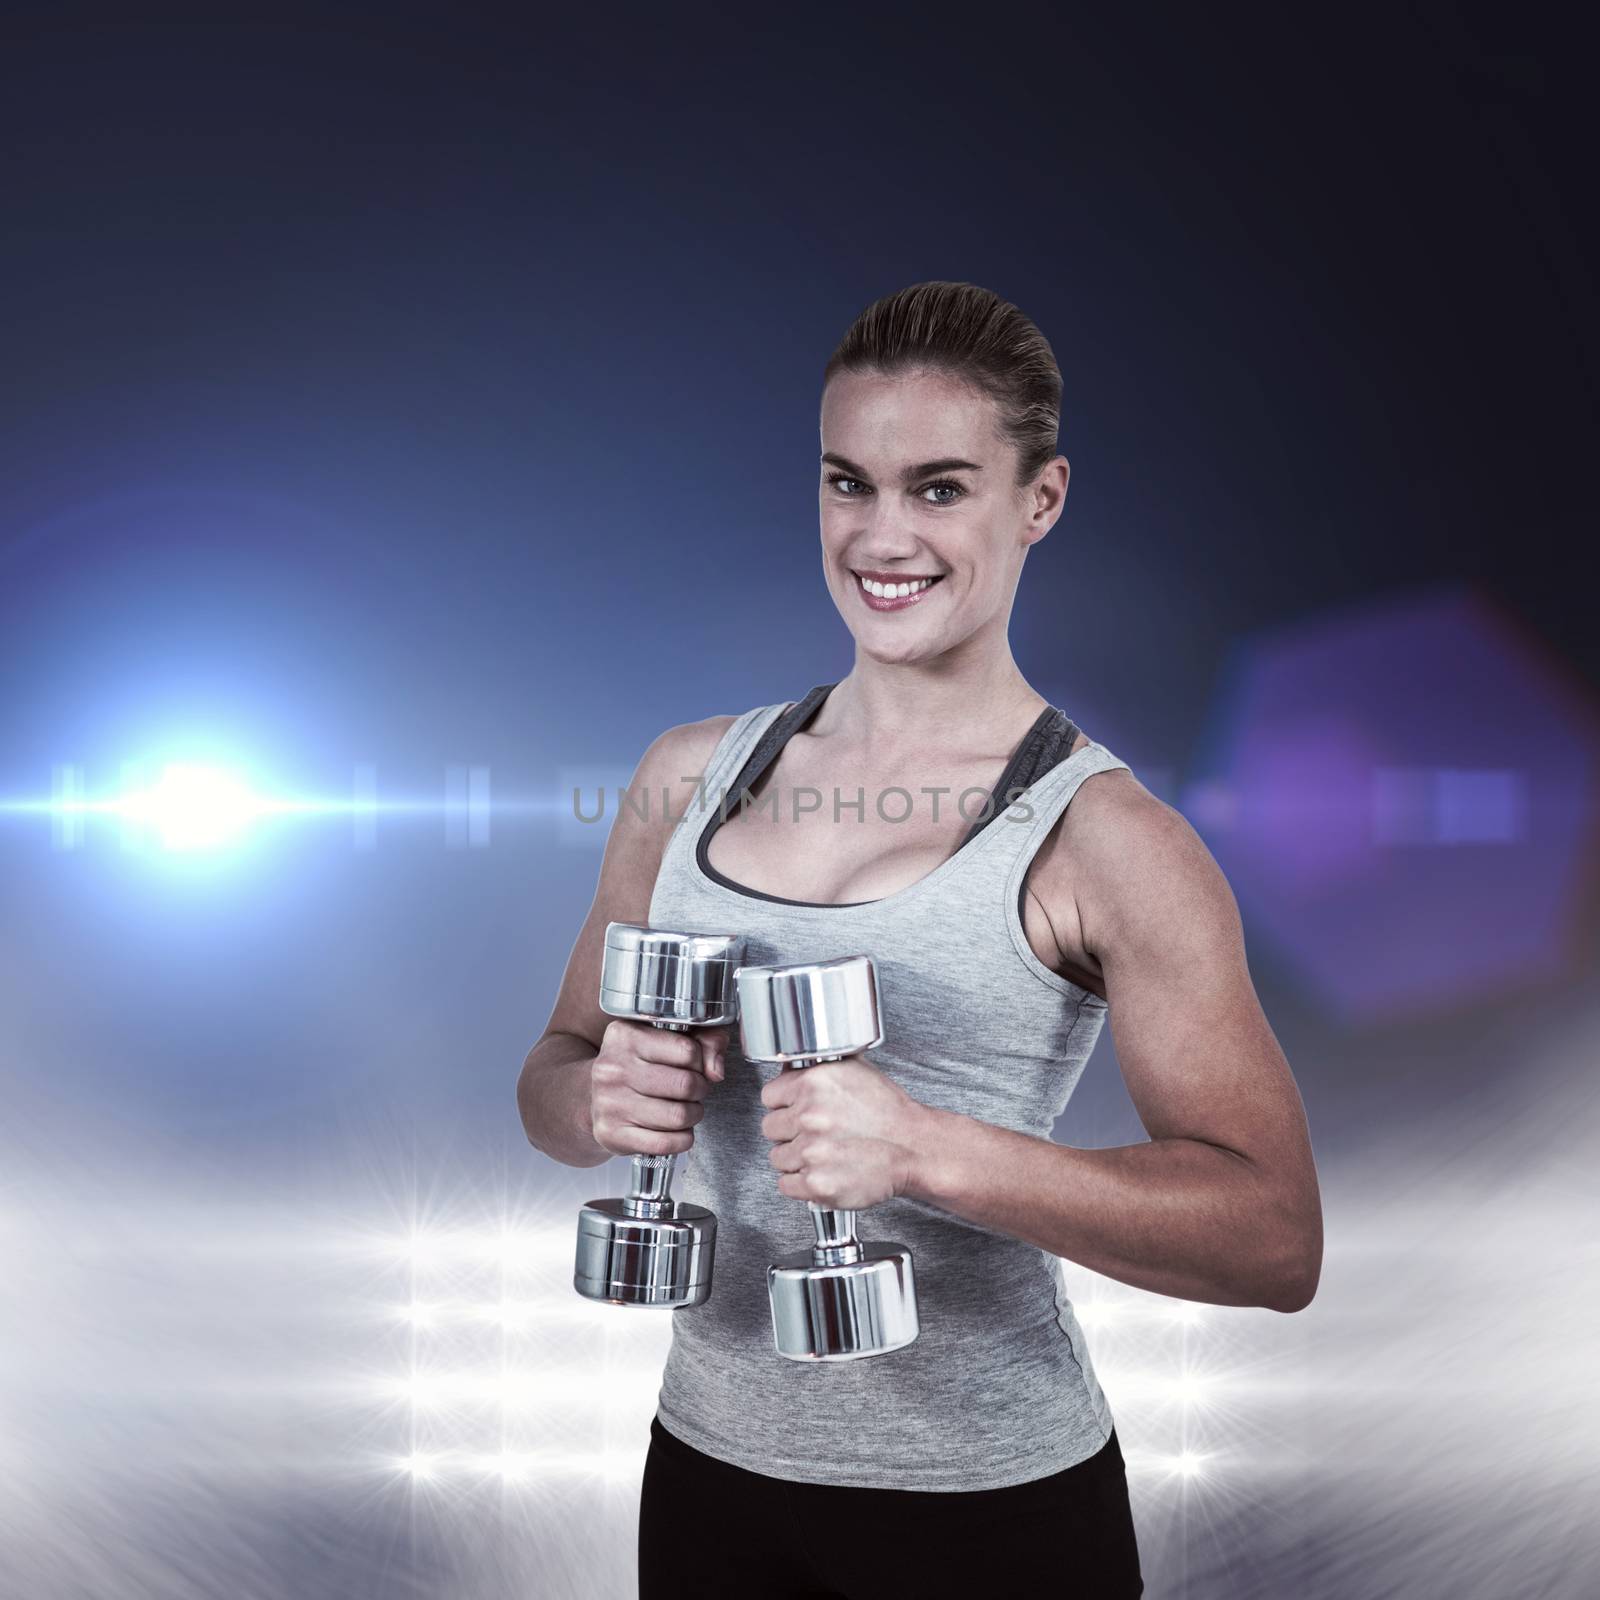  Muscular woman working out with dumbbells  against spotlights Muscular woman working out with dumbbells on white background